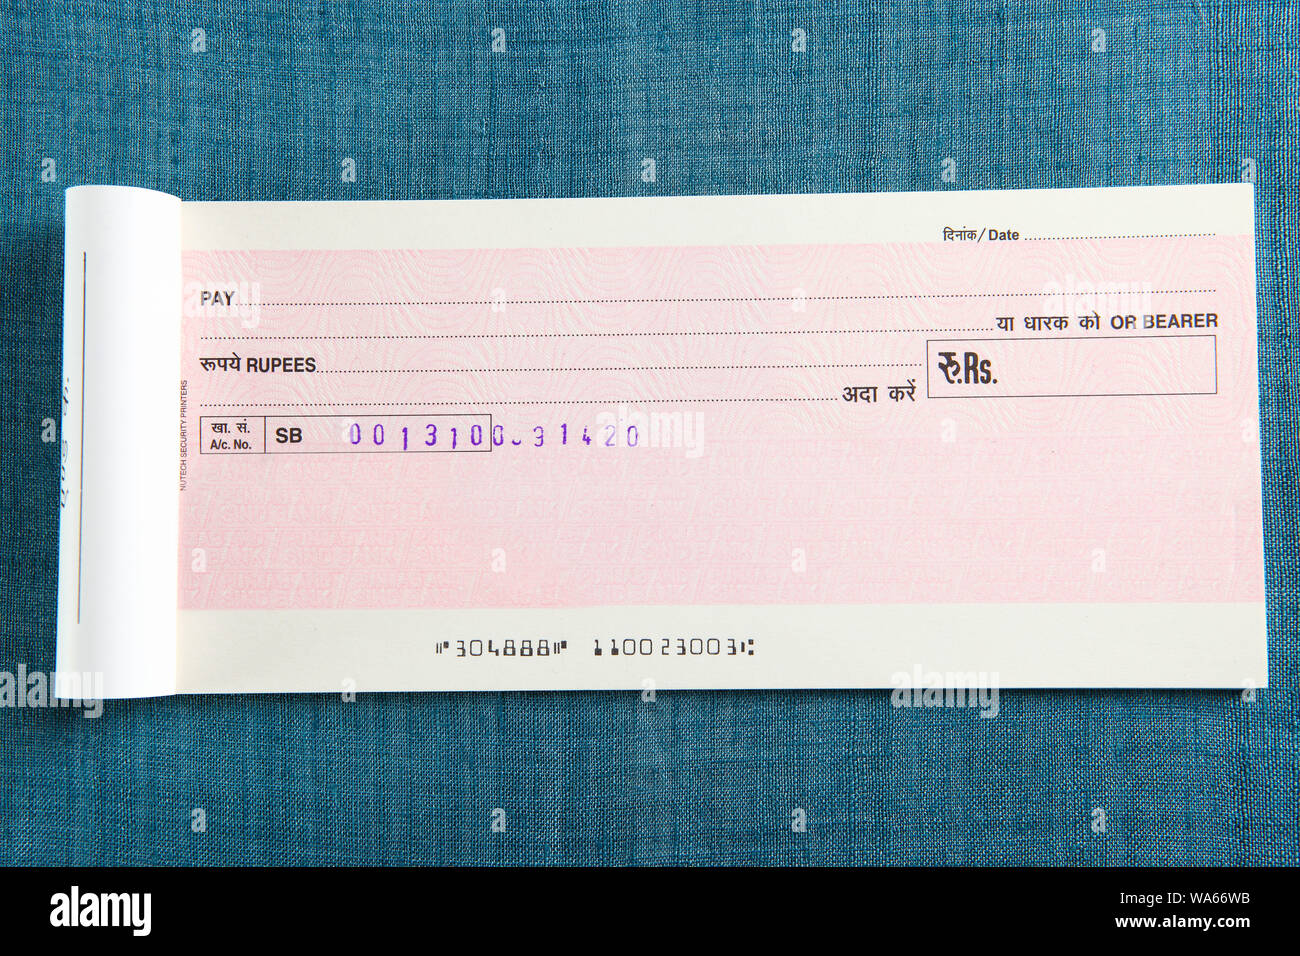 Blank Cheque High Resolution Stock Photography and Images - Alamy